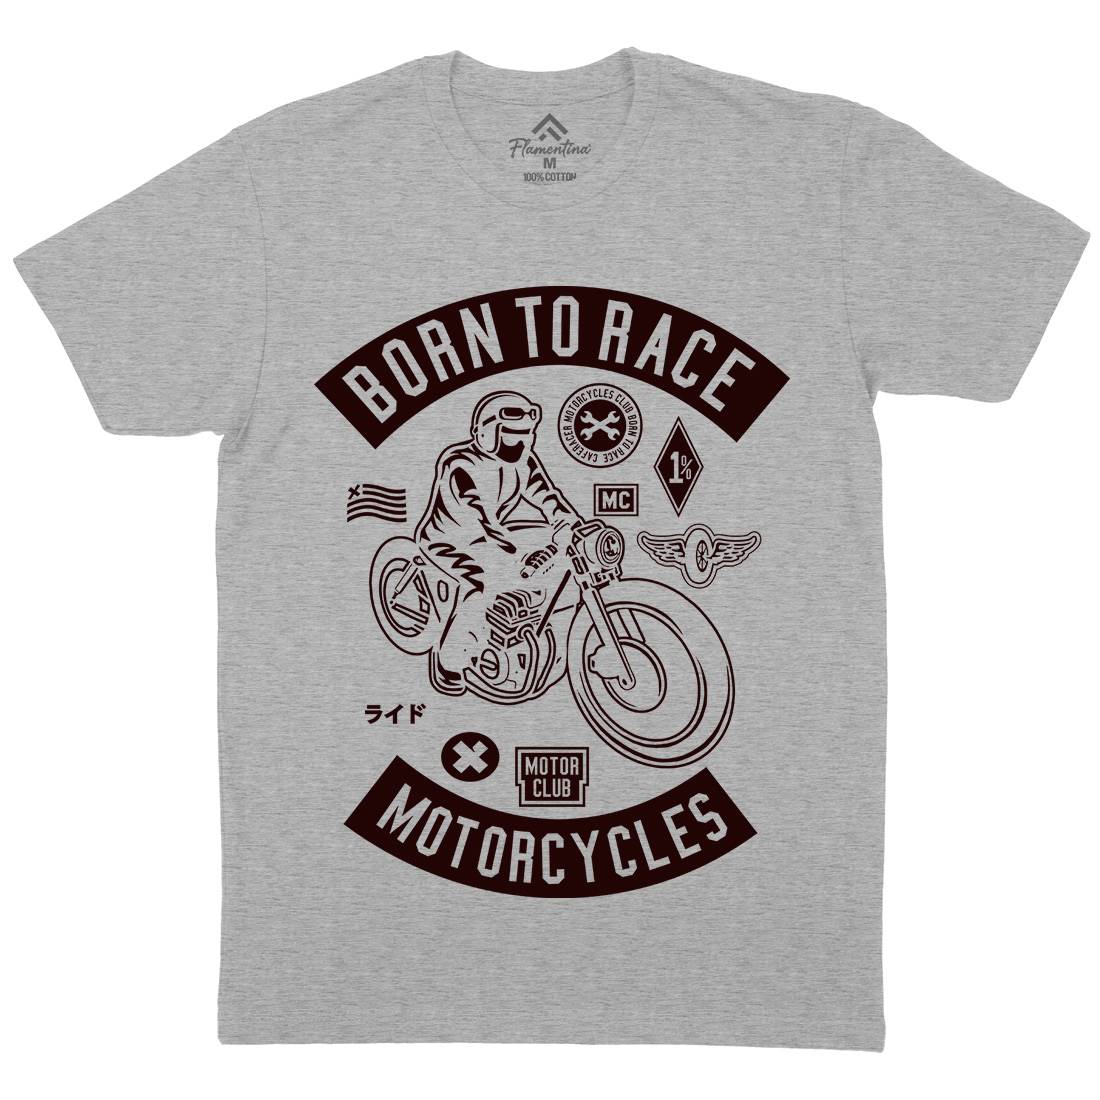 Born To Race Mens Organic Crew Neck T-Shirt Motorcycles A210